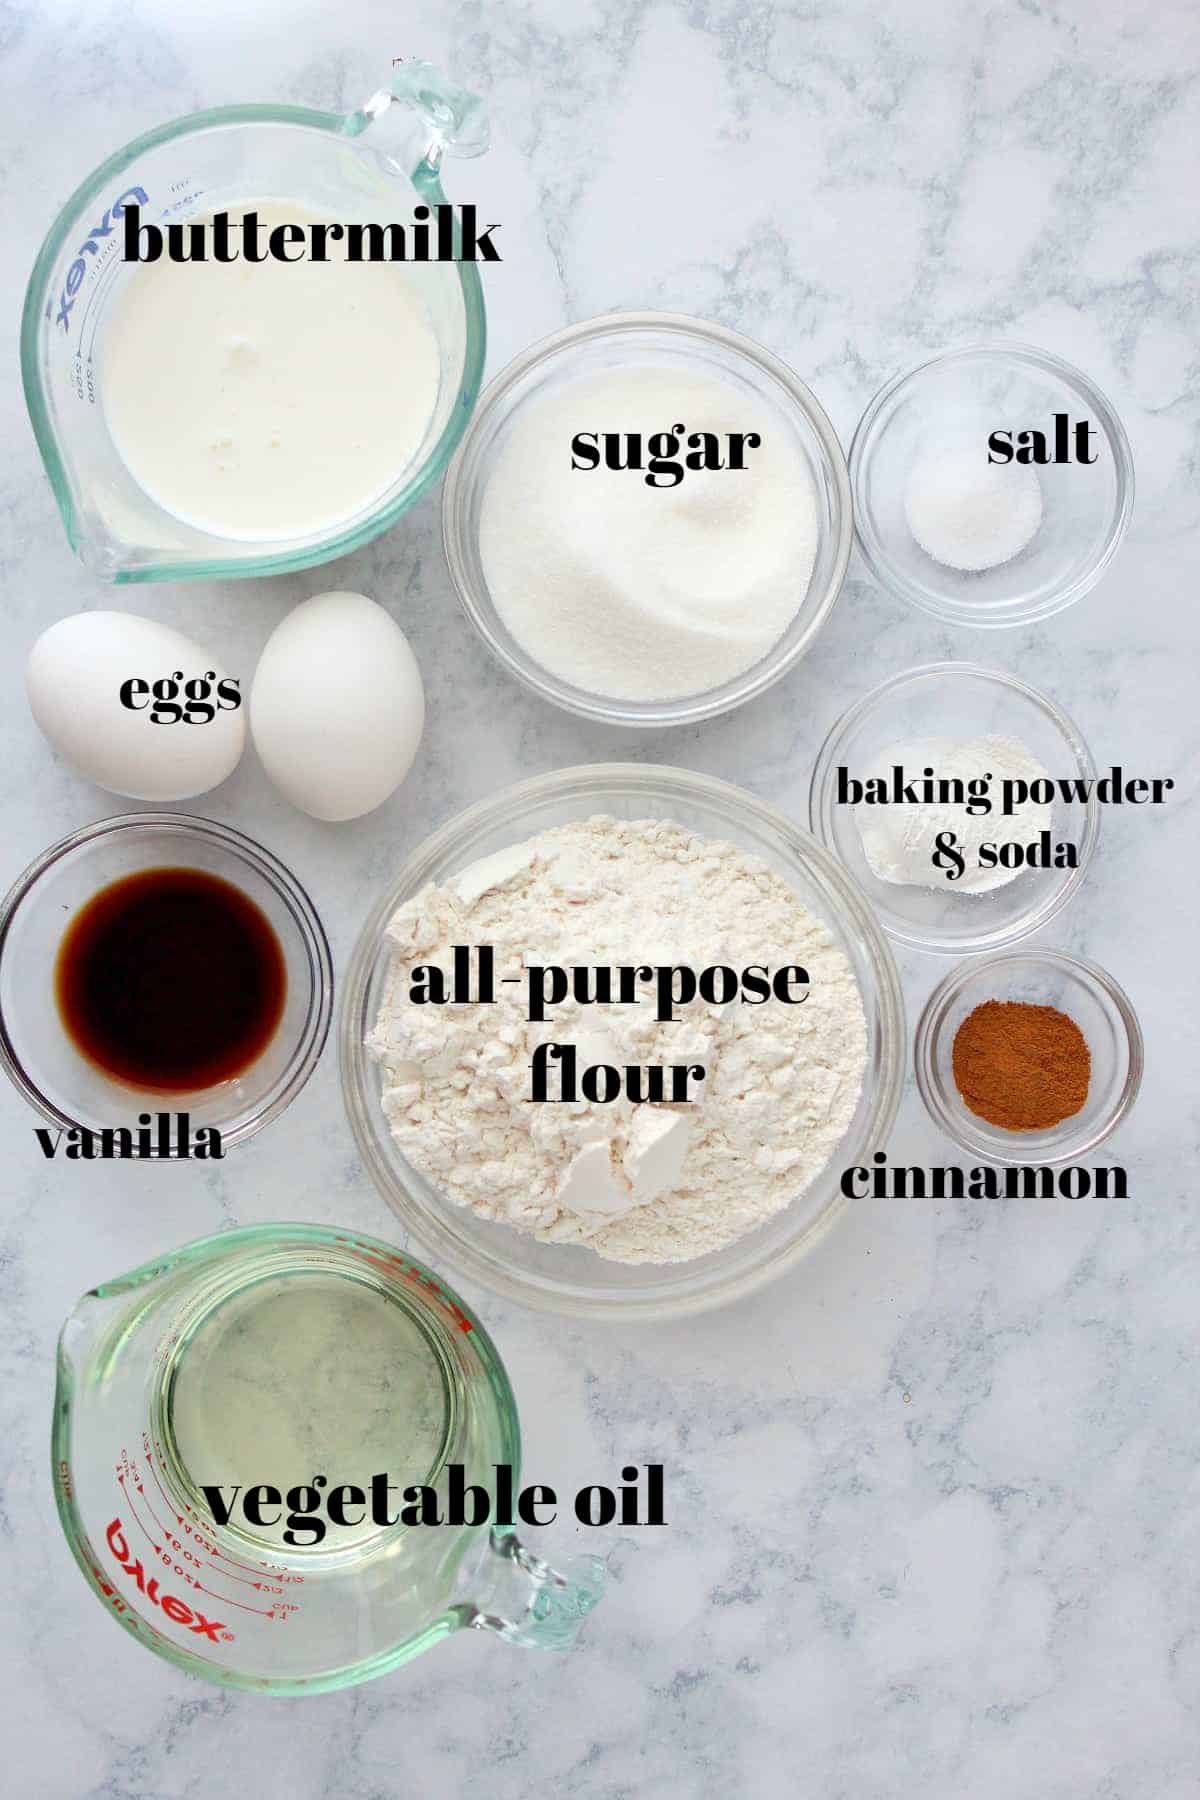 Ingredients for crumb cake in glass bowls and cups, on a marble board.